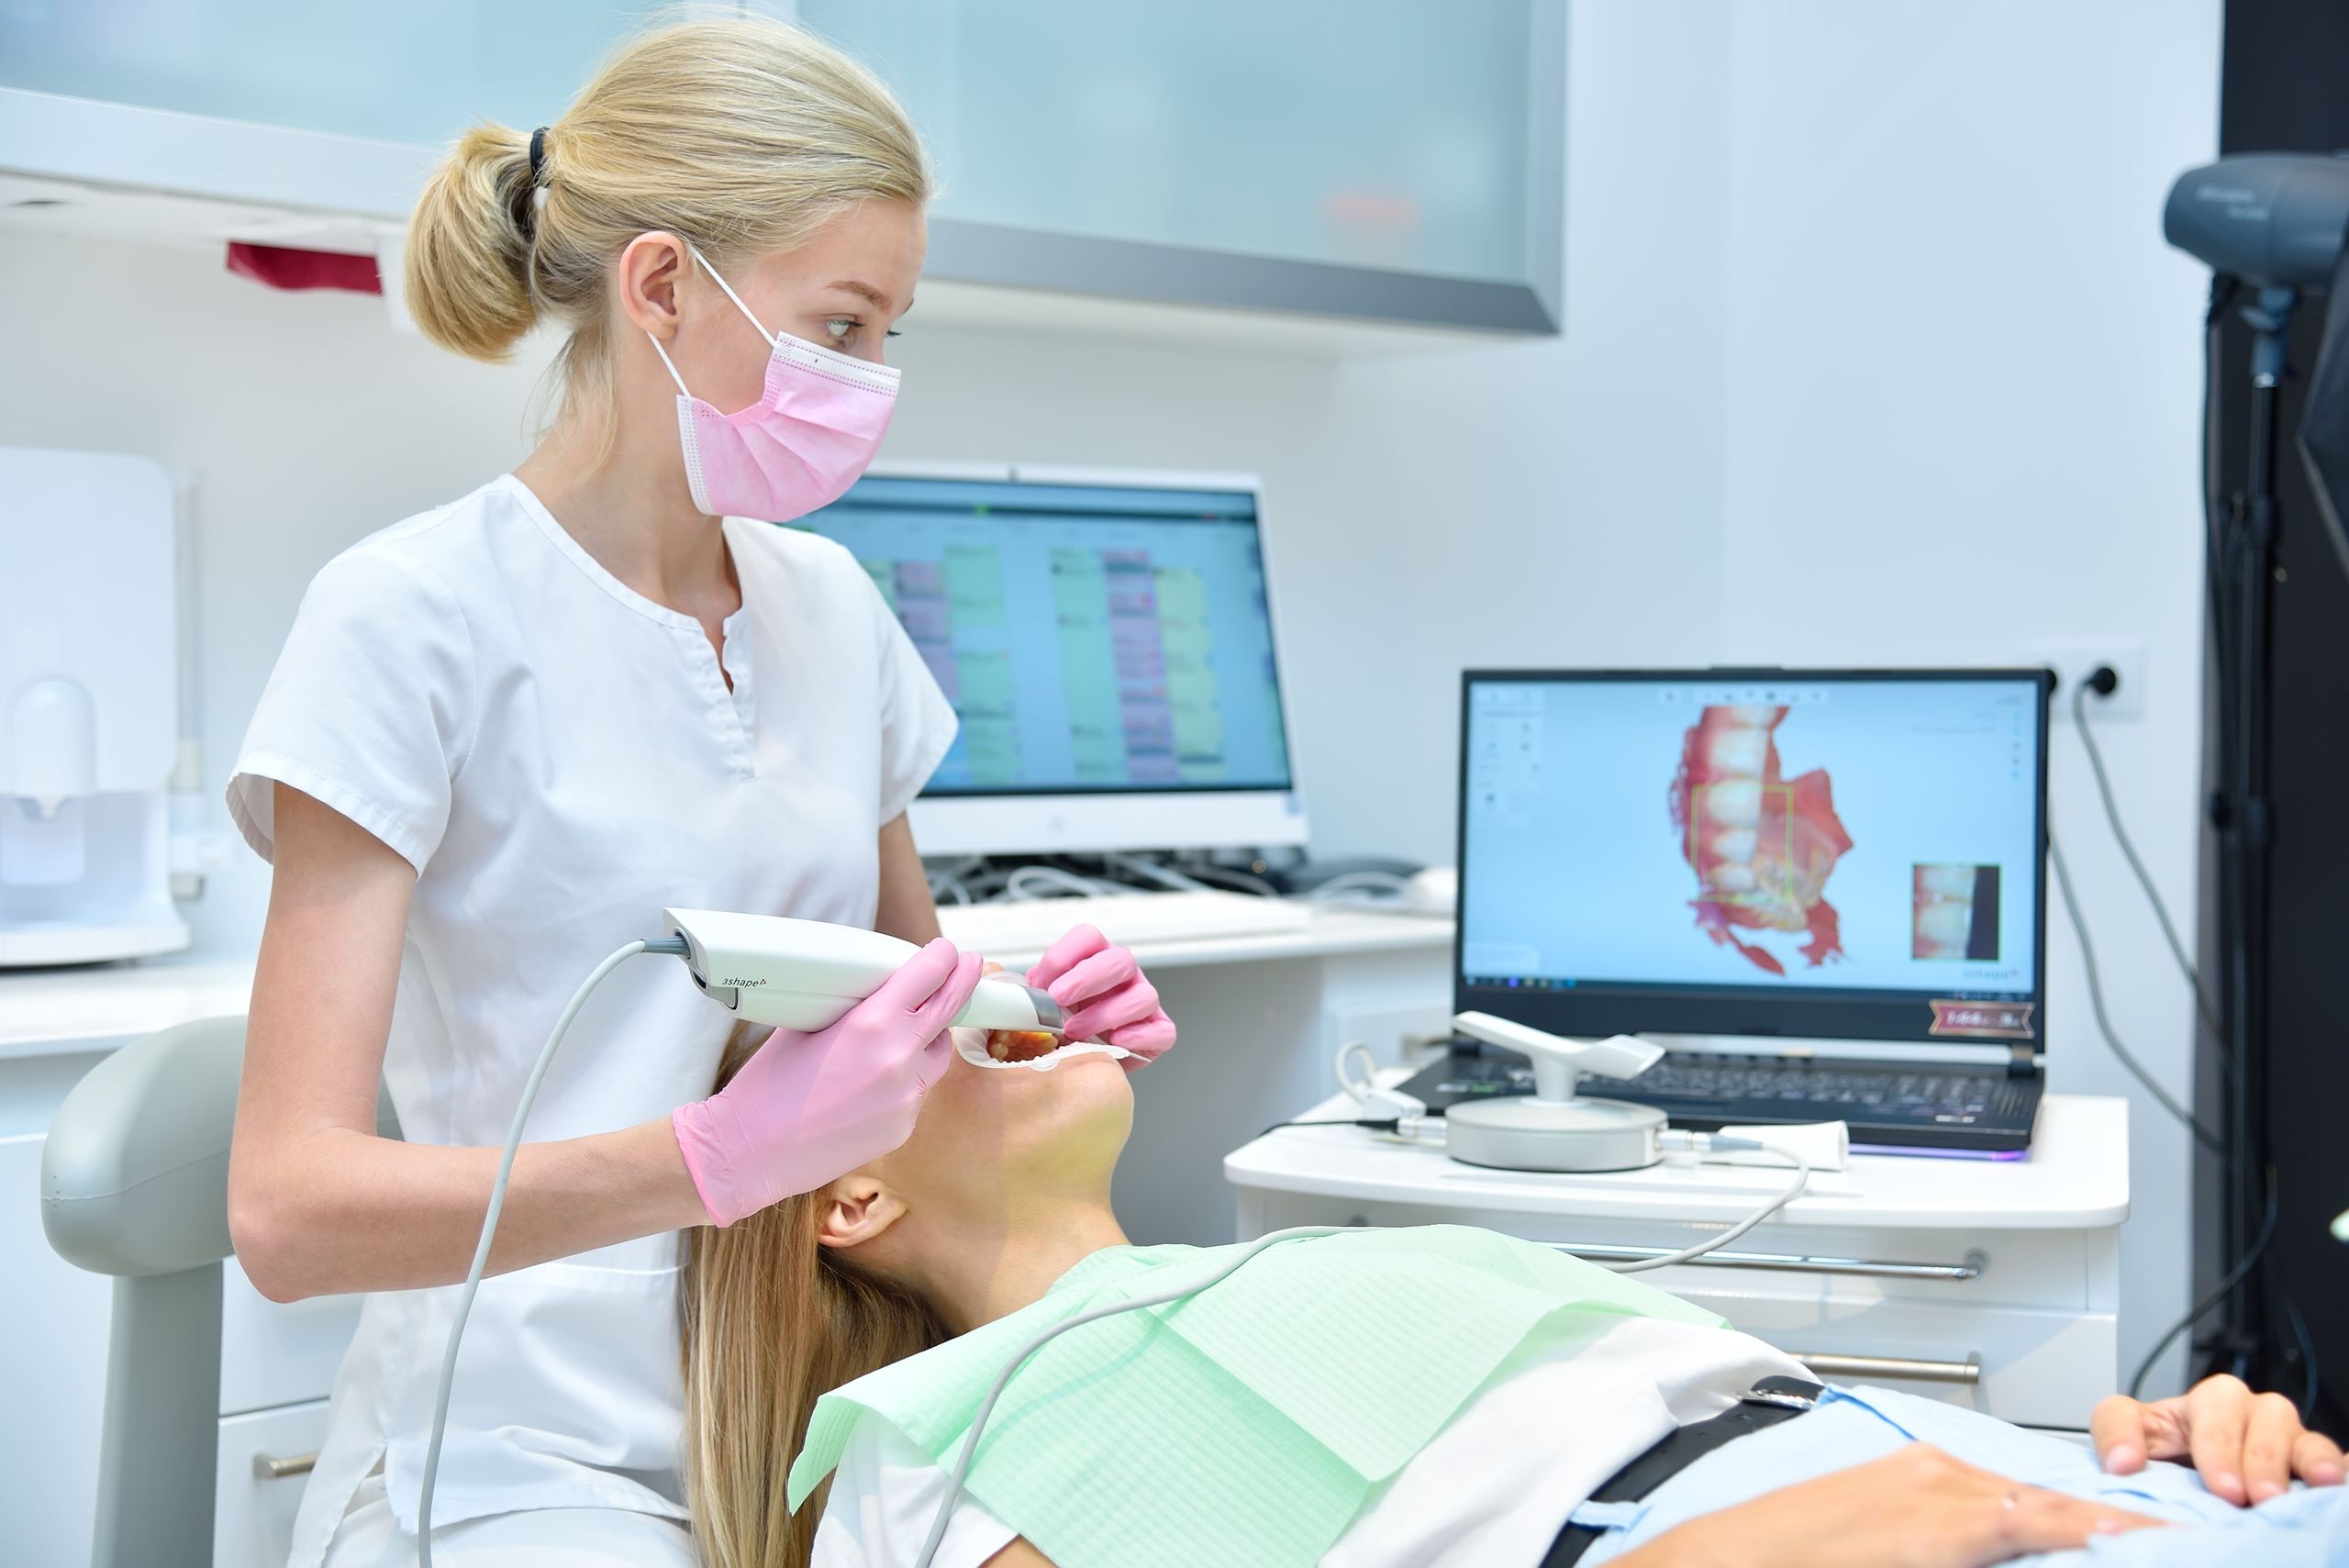 Dental CAD/CAM software: what is it and how to choose?